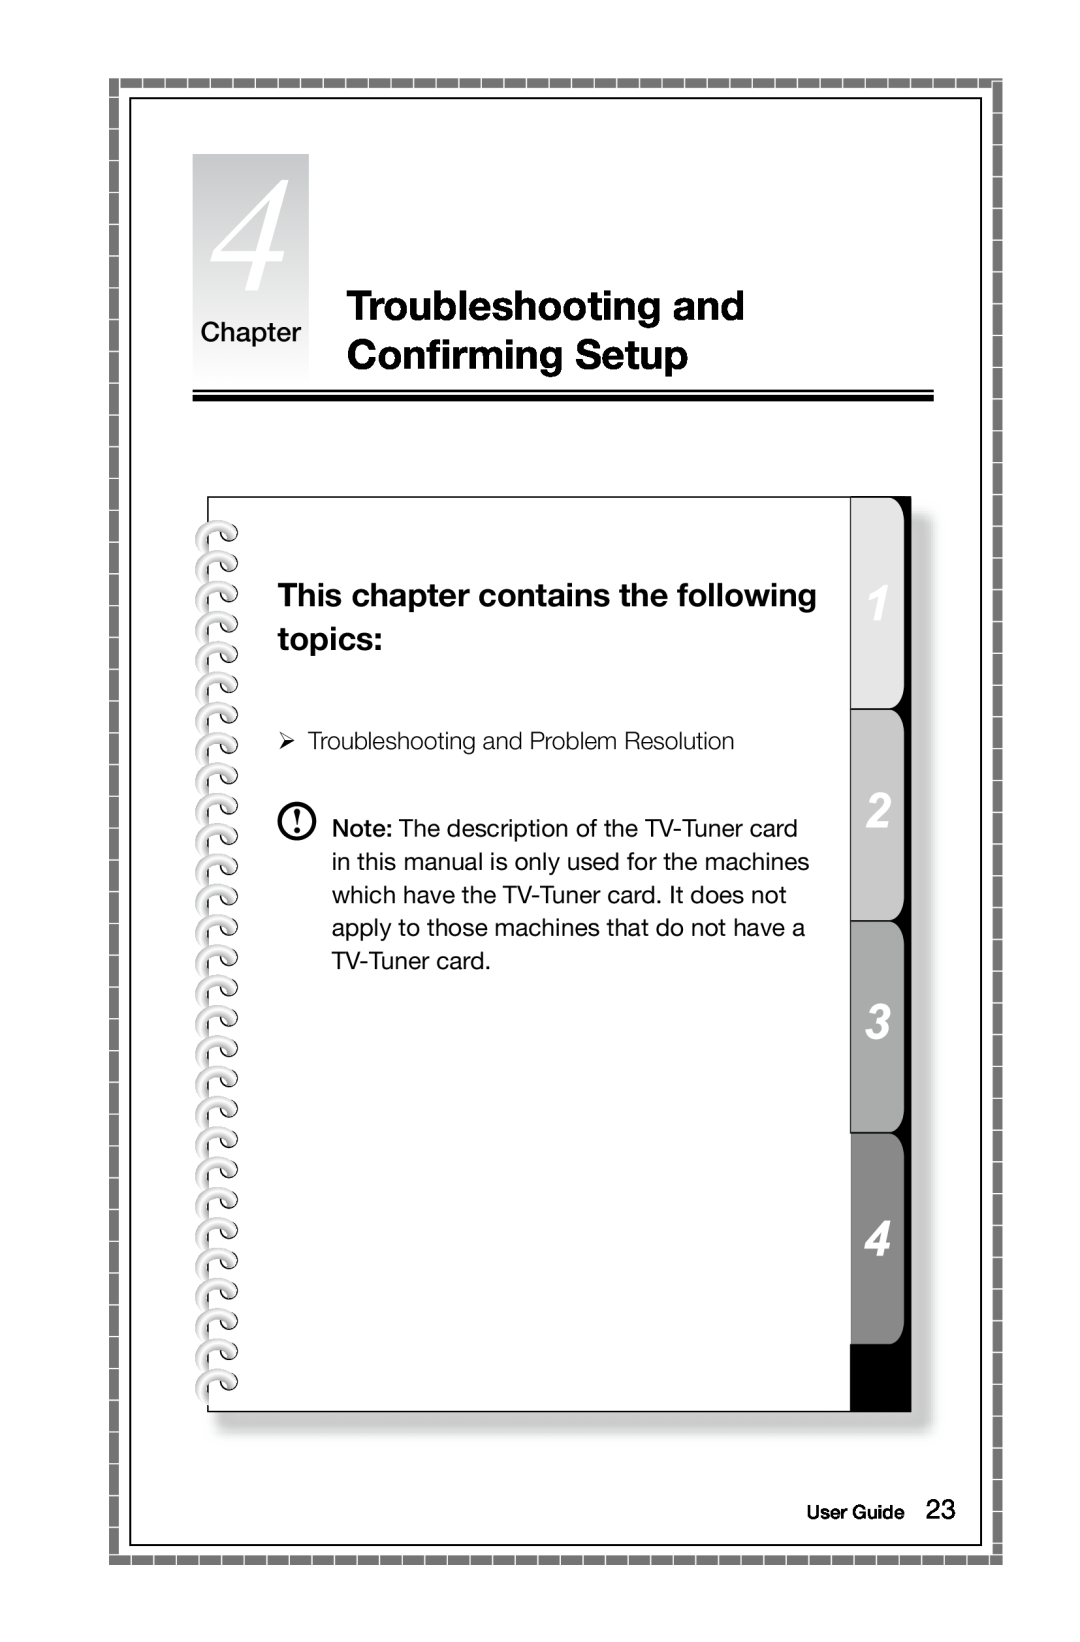 Lenovo 10068/7752 Troubleshooting and Chapter Confirming Setup, This chapter contains the following topics, User Guide 